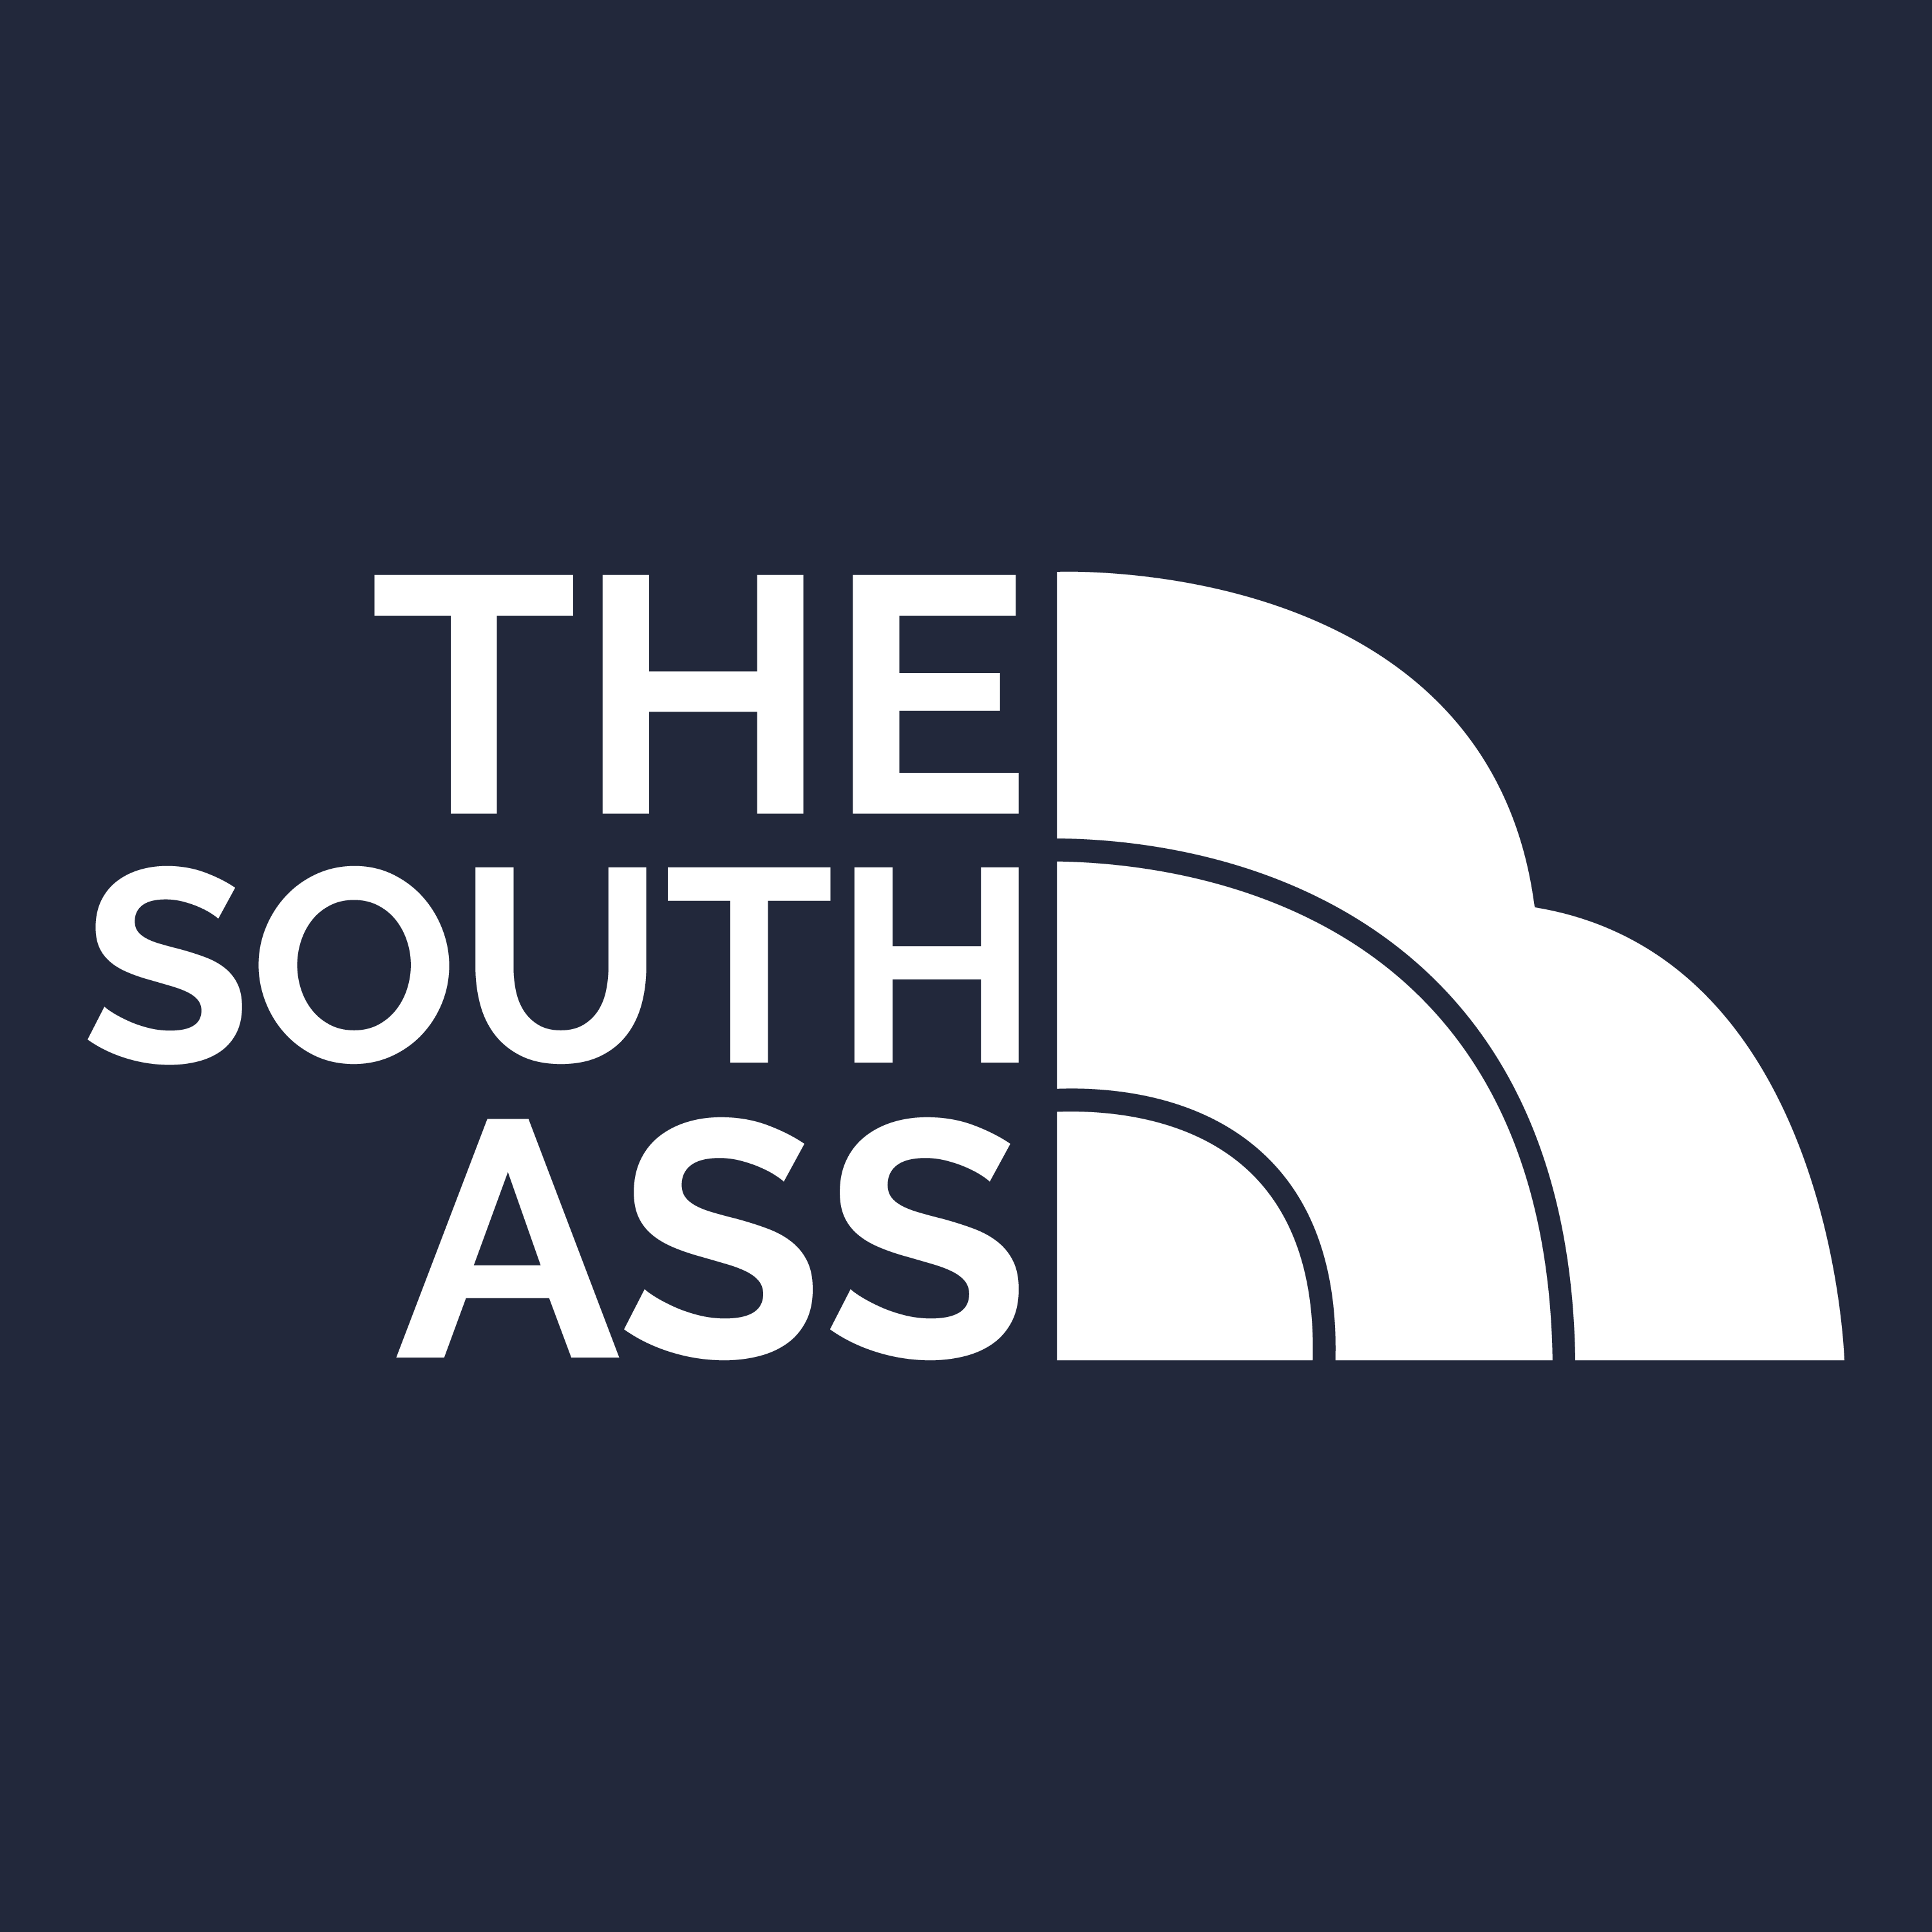 The South Ass